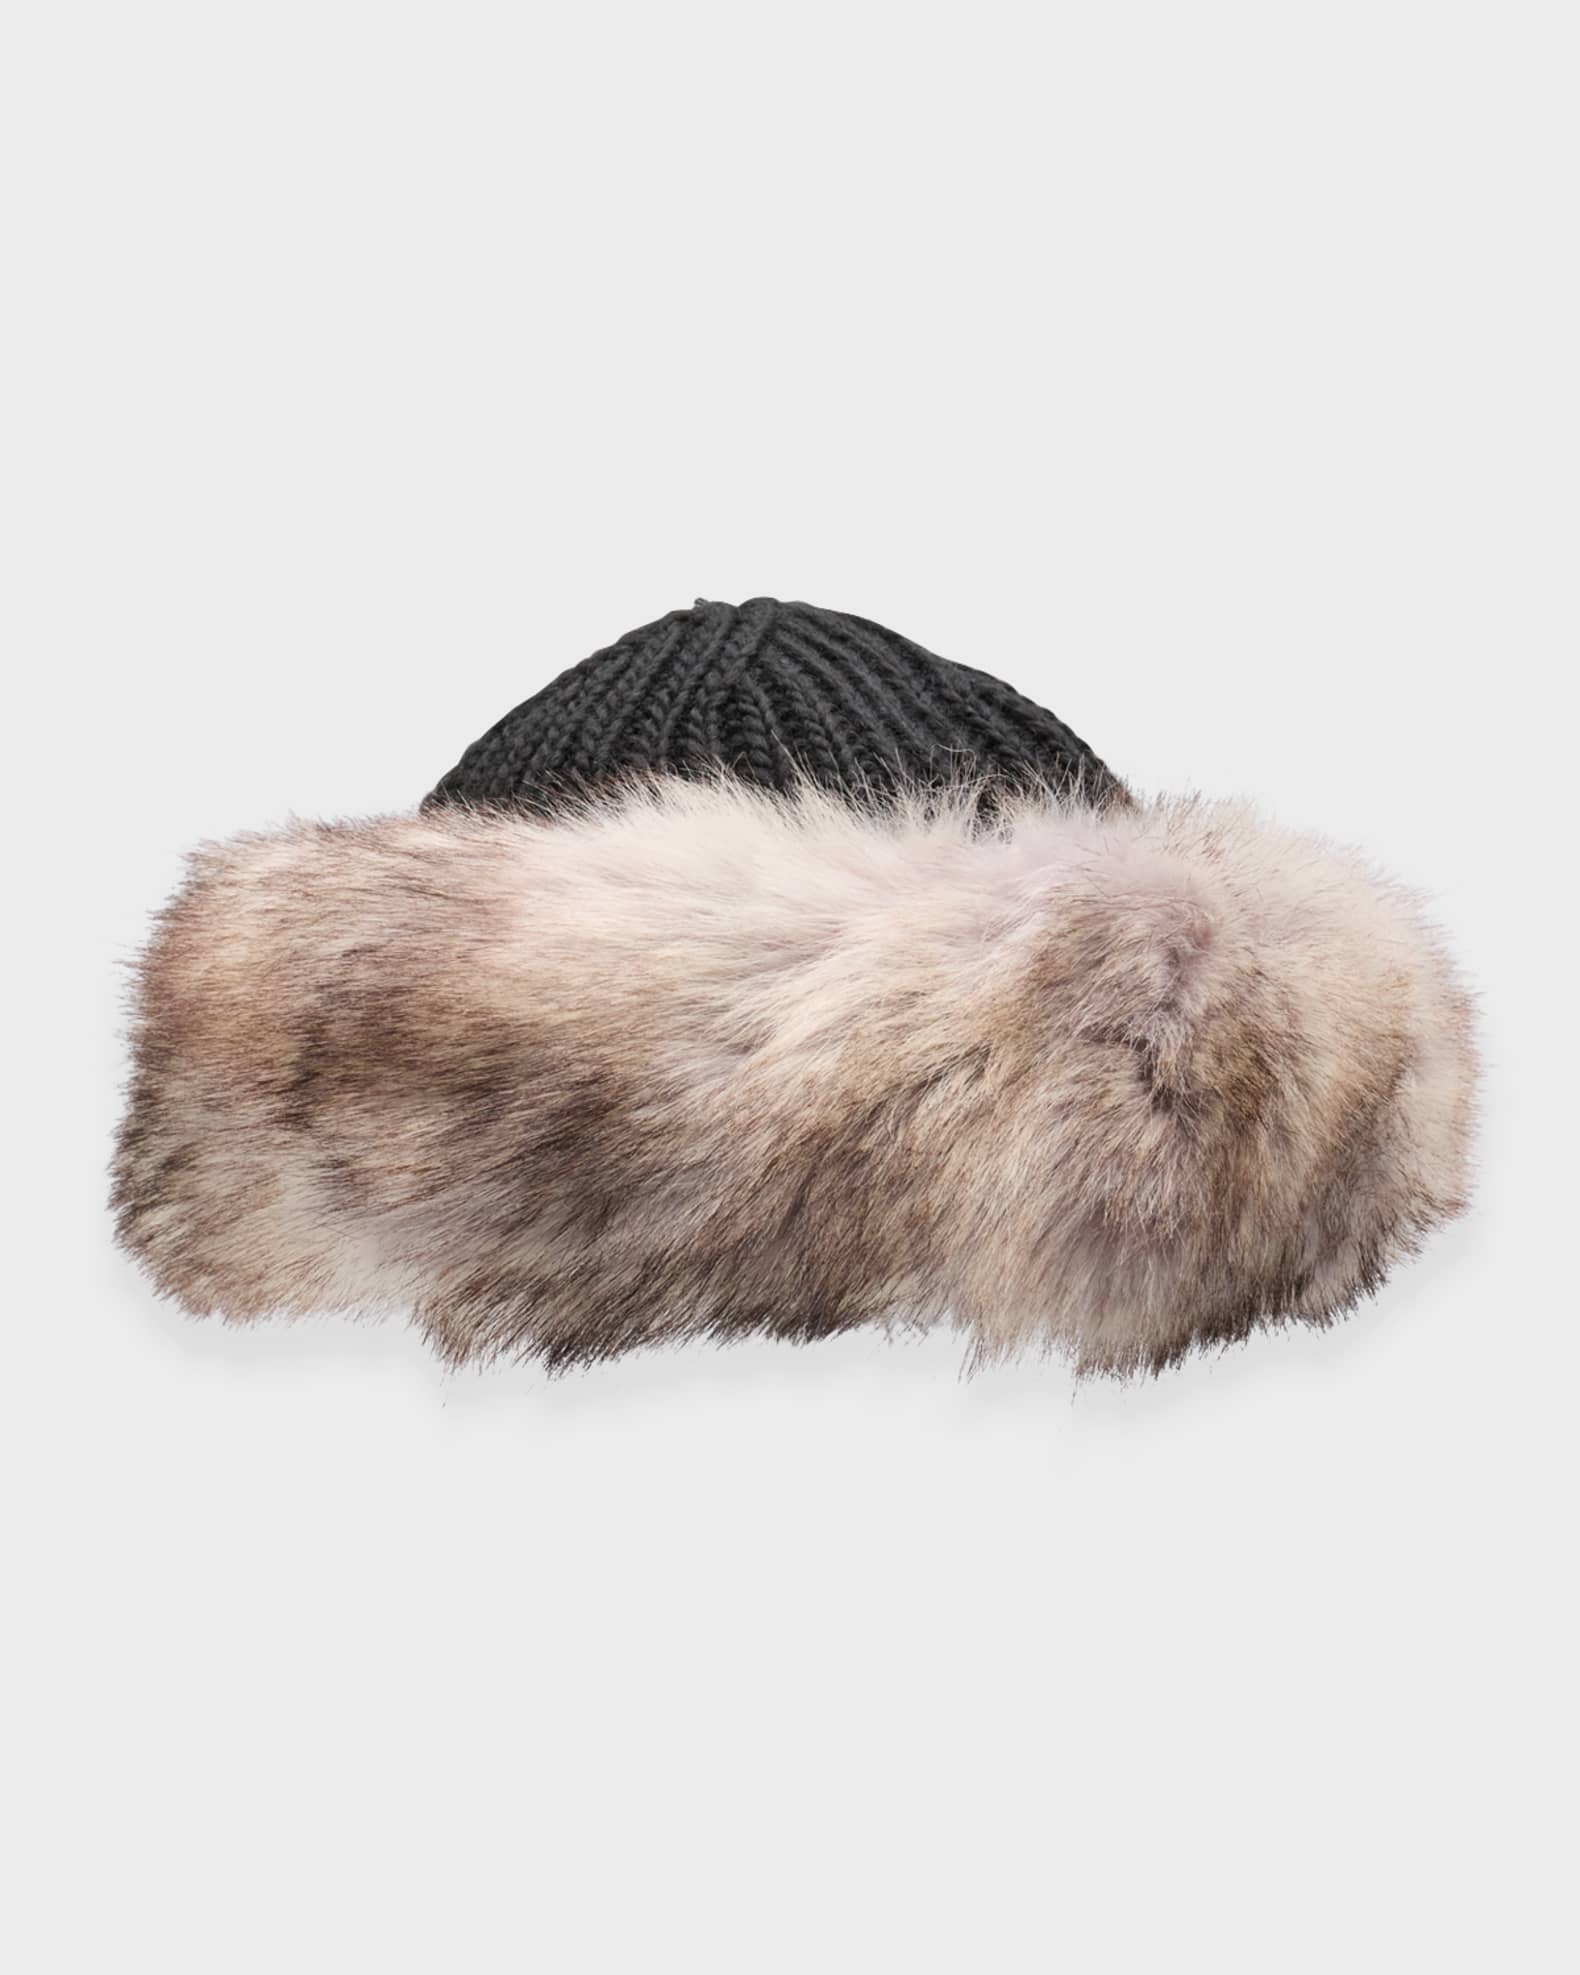 Shop All - Neckwear - Faux and Real Fur Scarves - Page 1 - Surell  Accessories